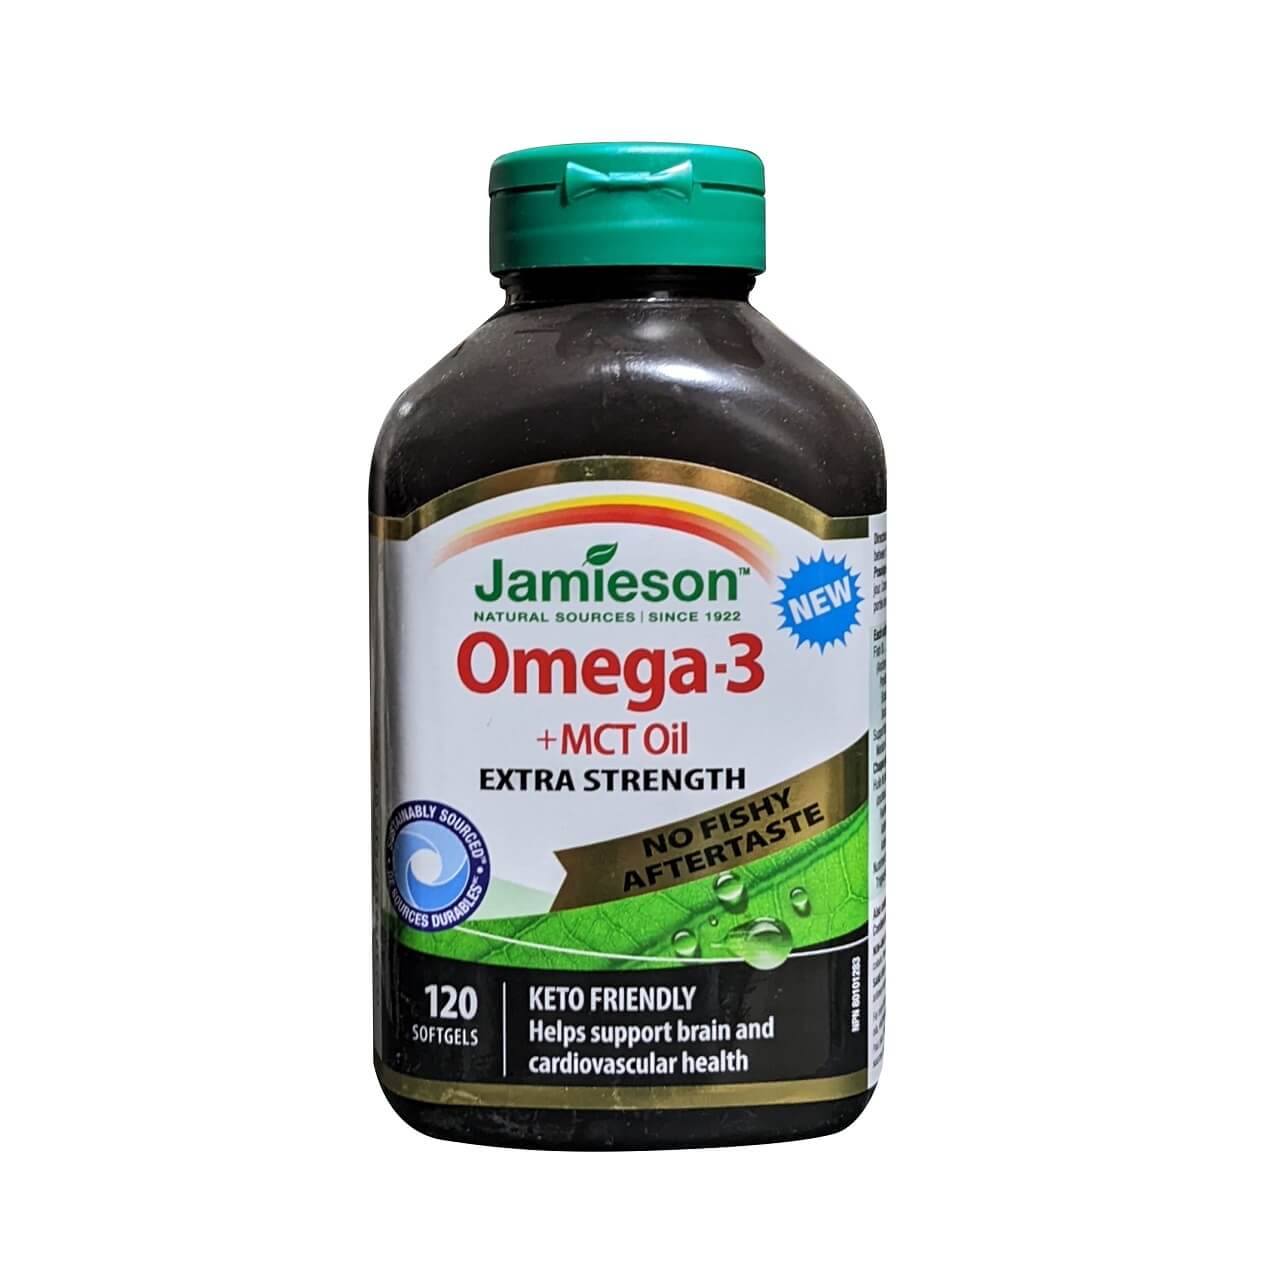 Product label for Jamieson Omega-3 + MCT Oil Extra Strength (120 softgels) in English